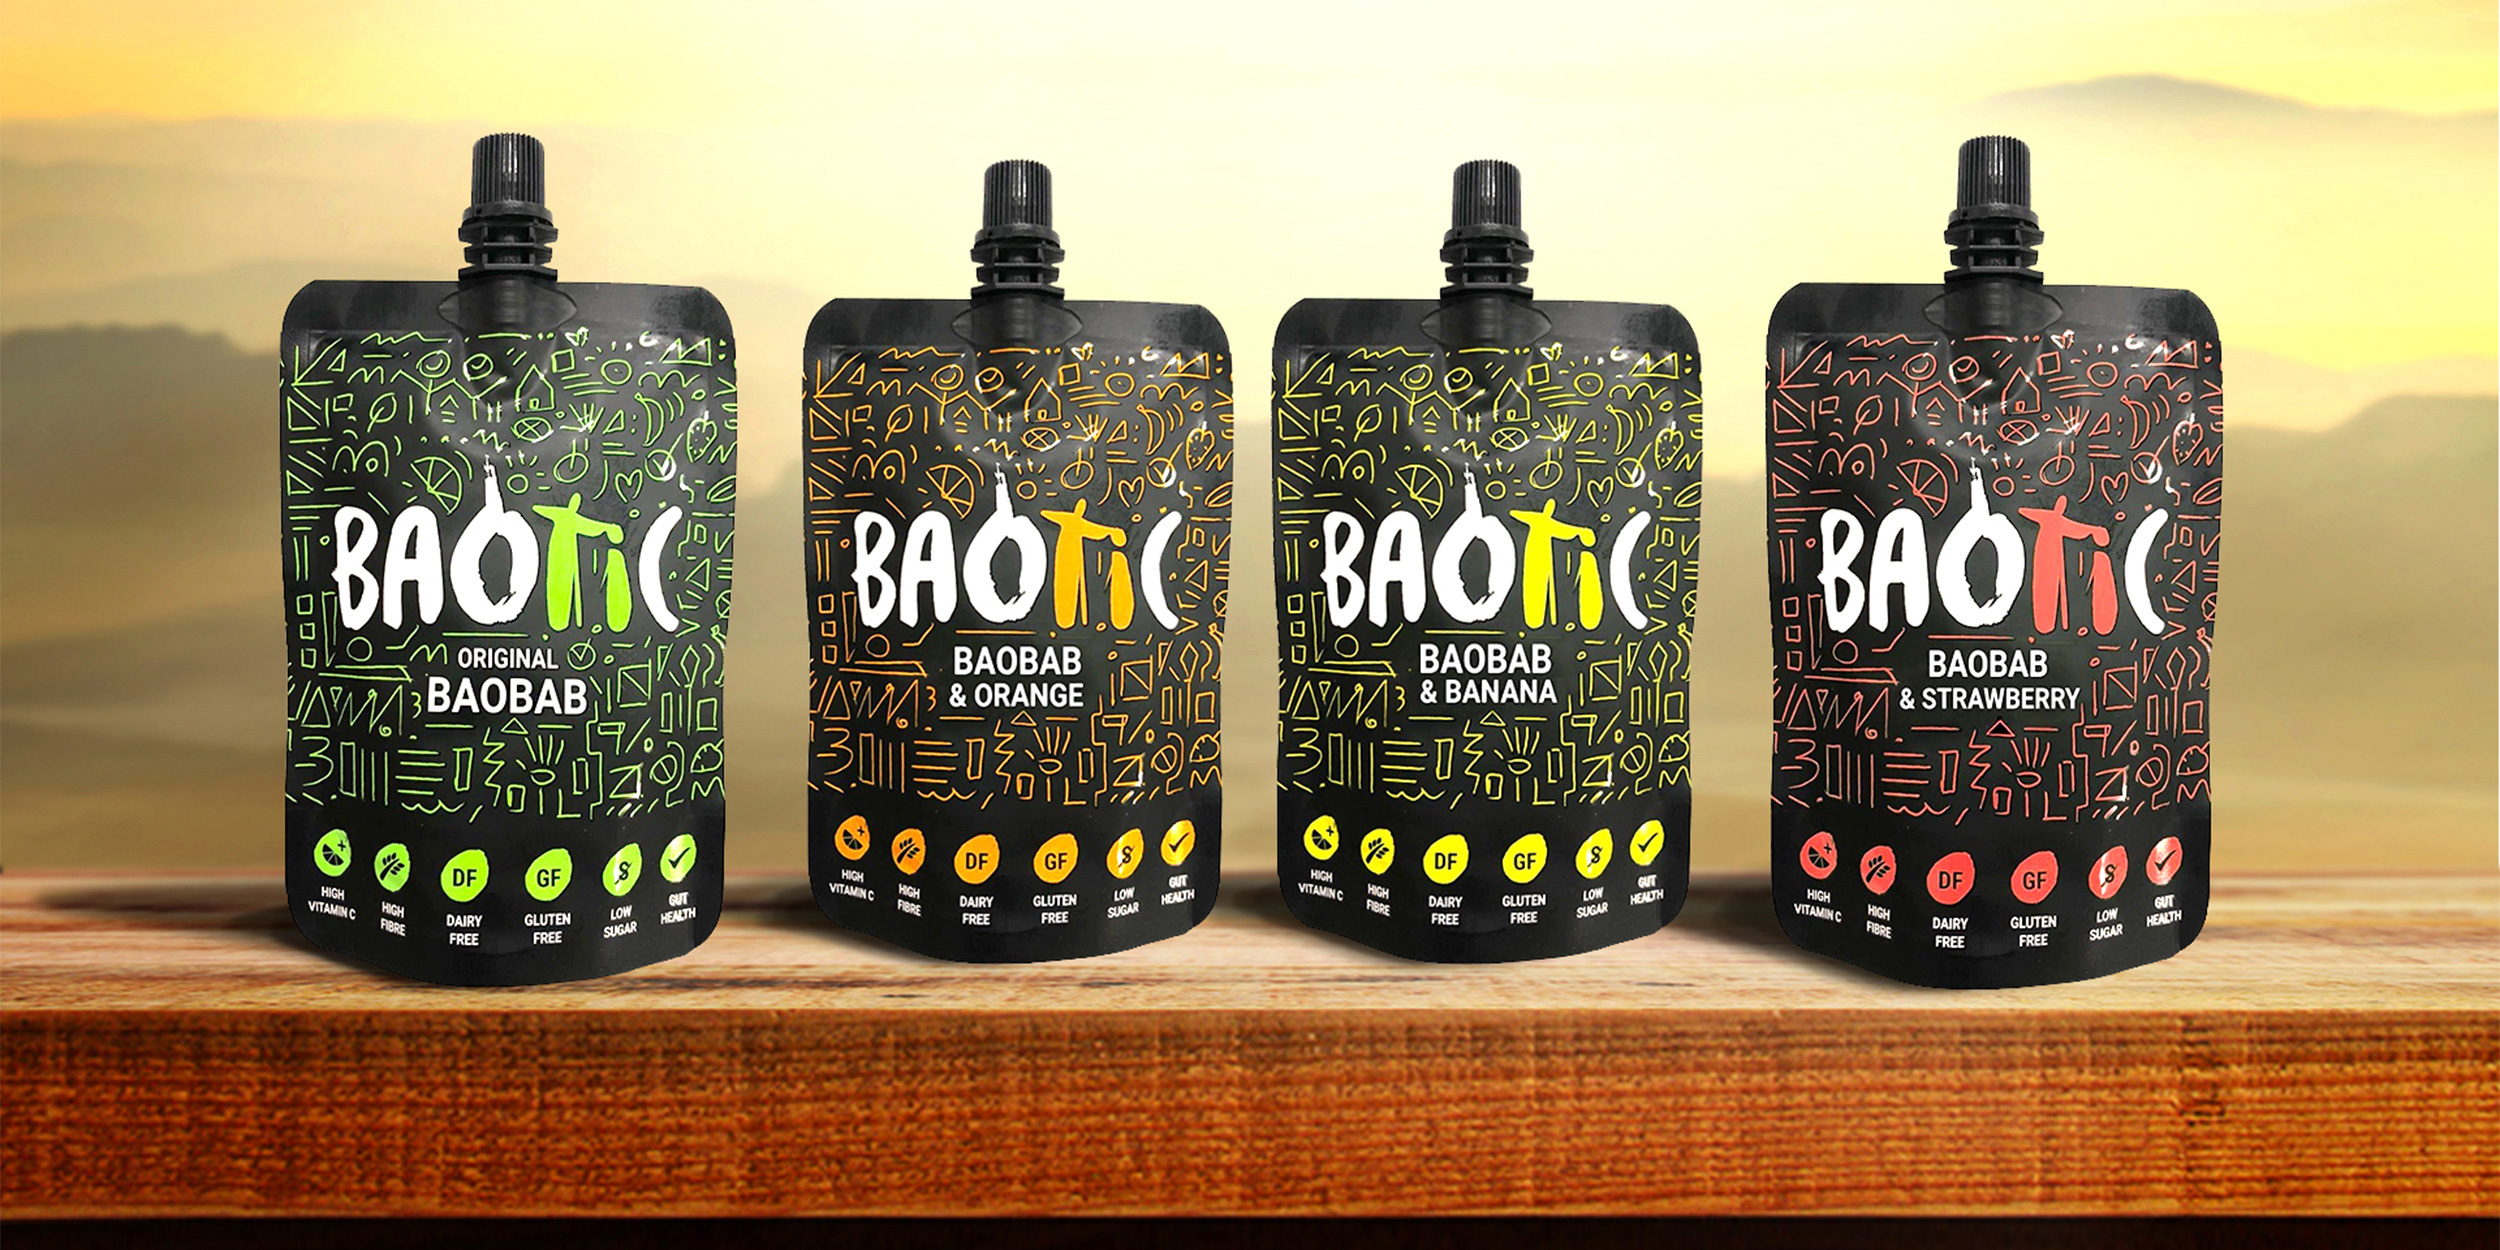 Drink Baotic, an African-inspired packaging design